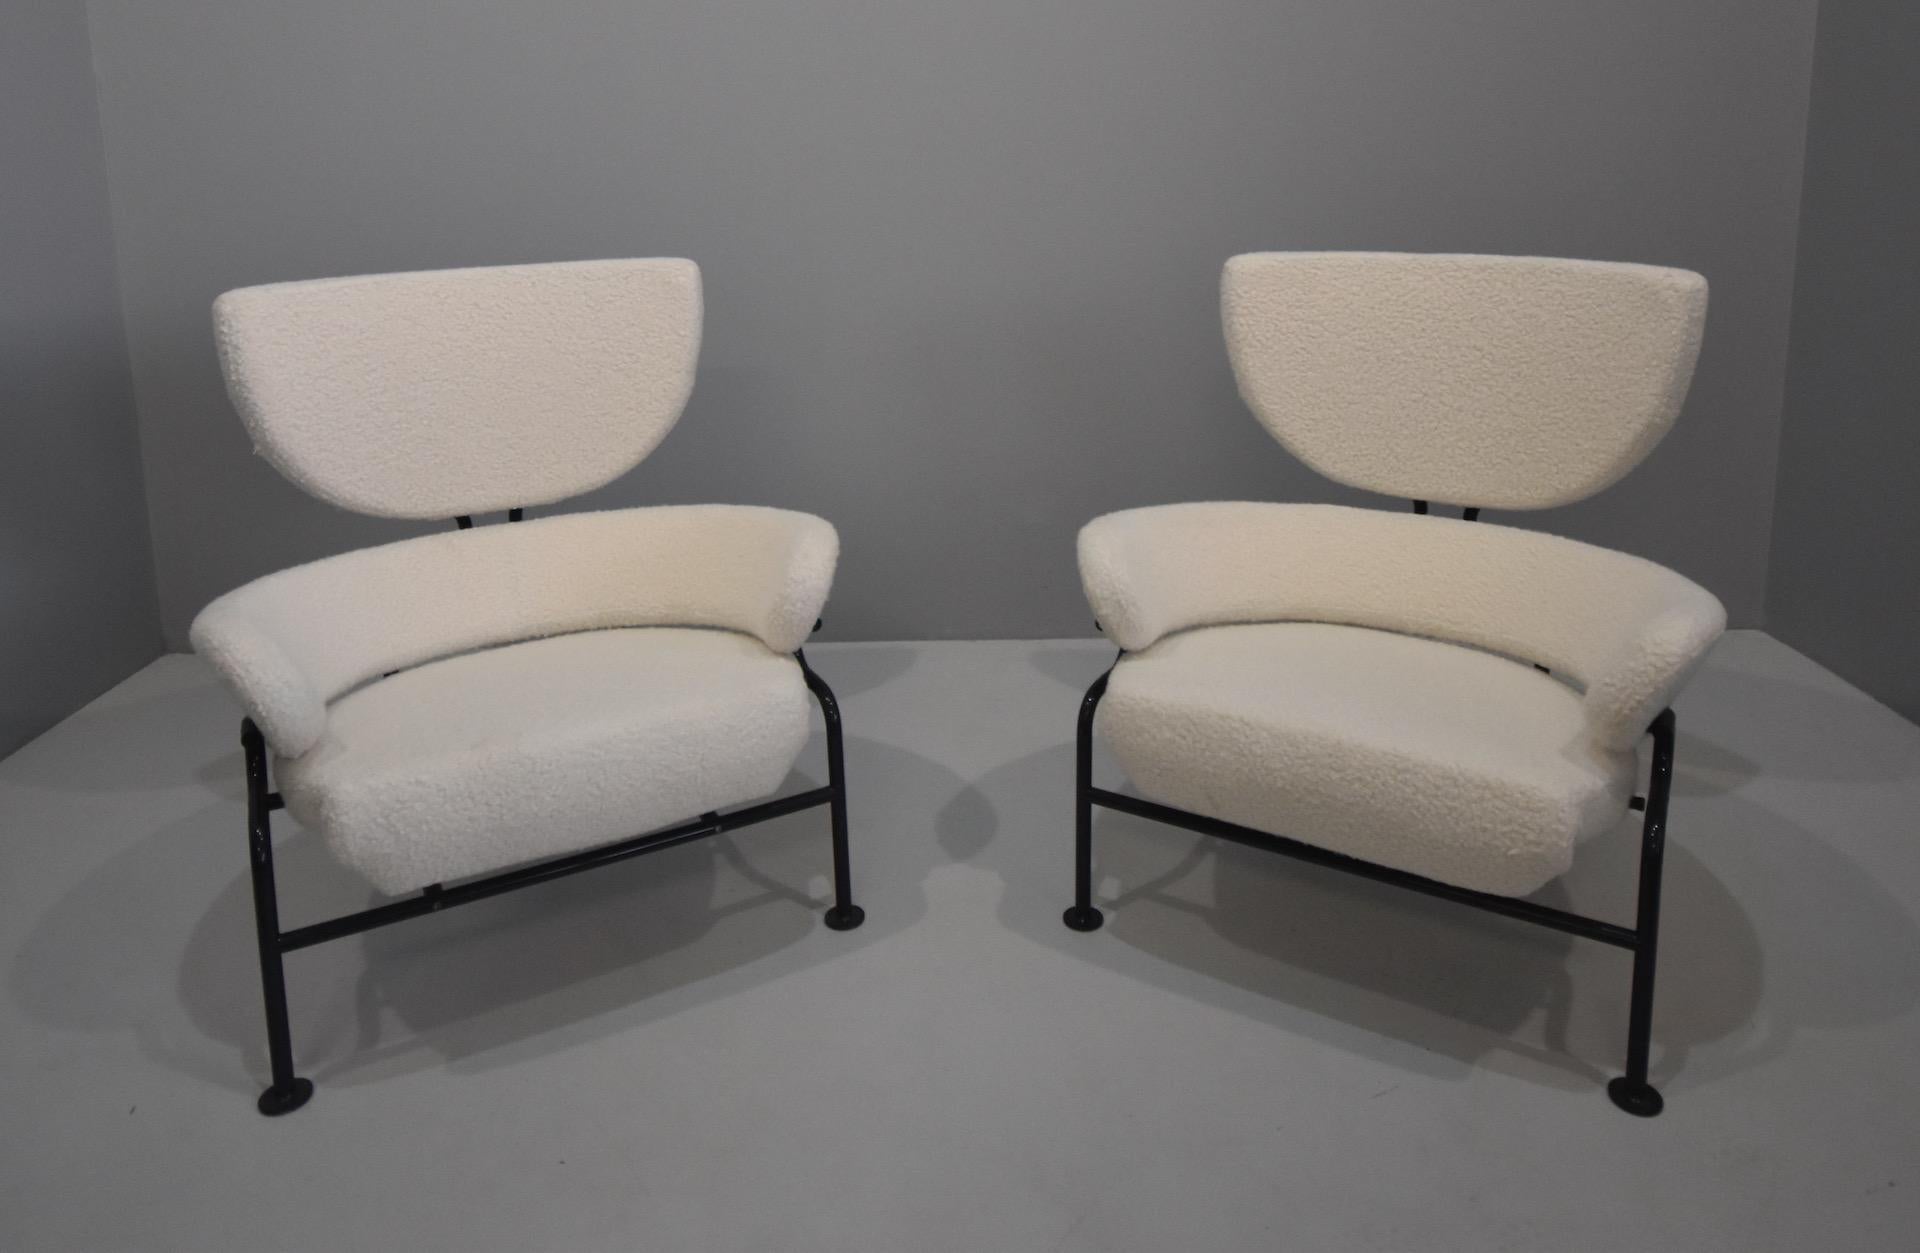 Pair of lounge chairs by famous Italian modernist Franco Albini and Franca Helg 